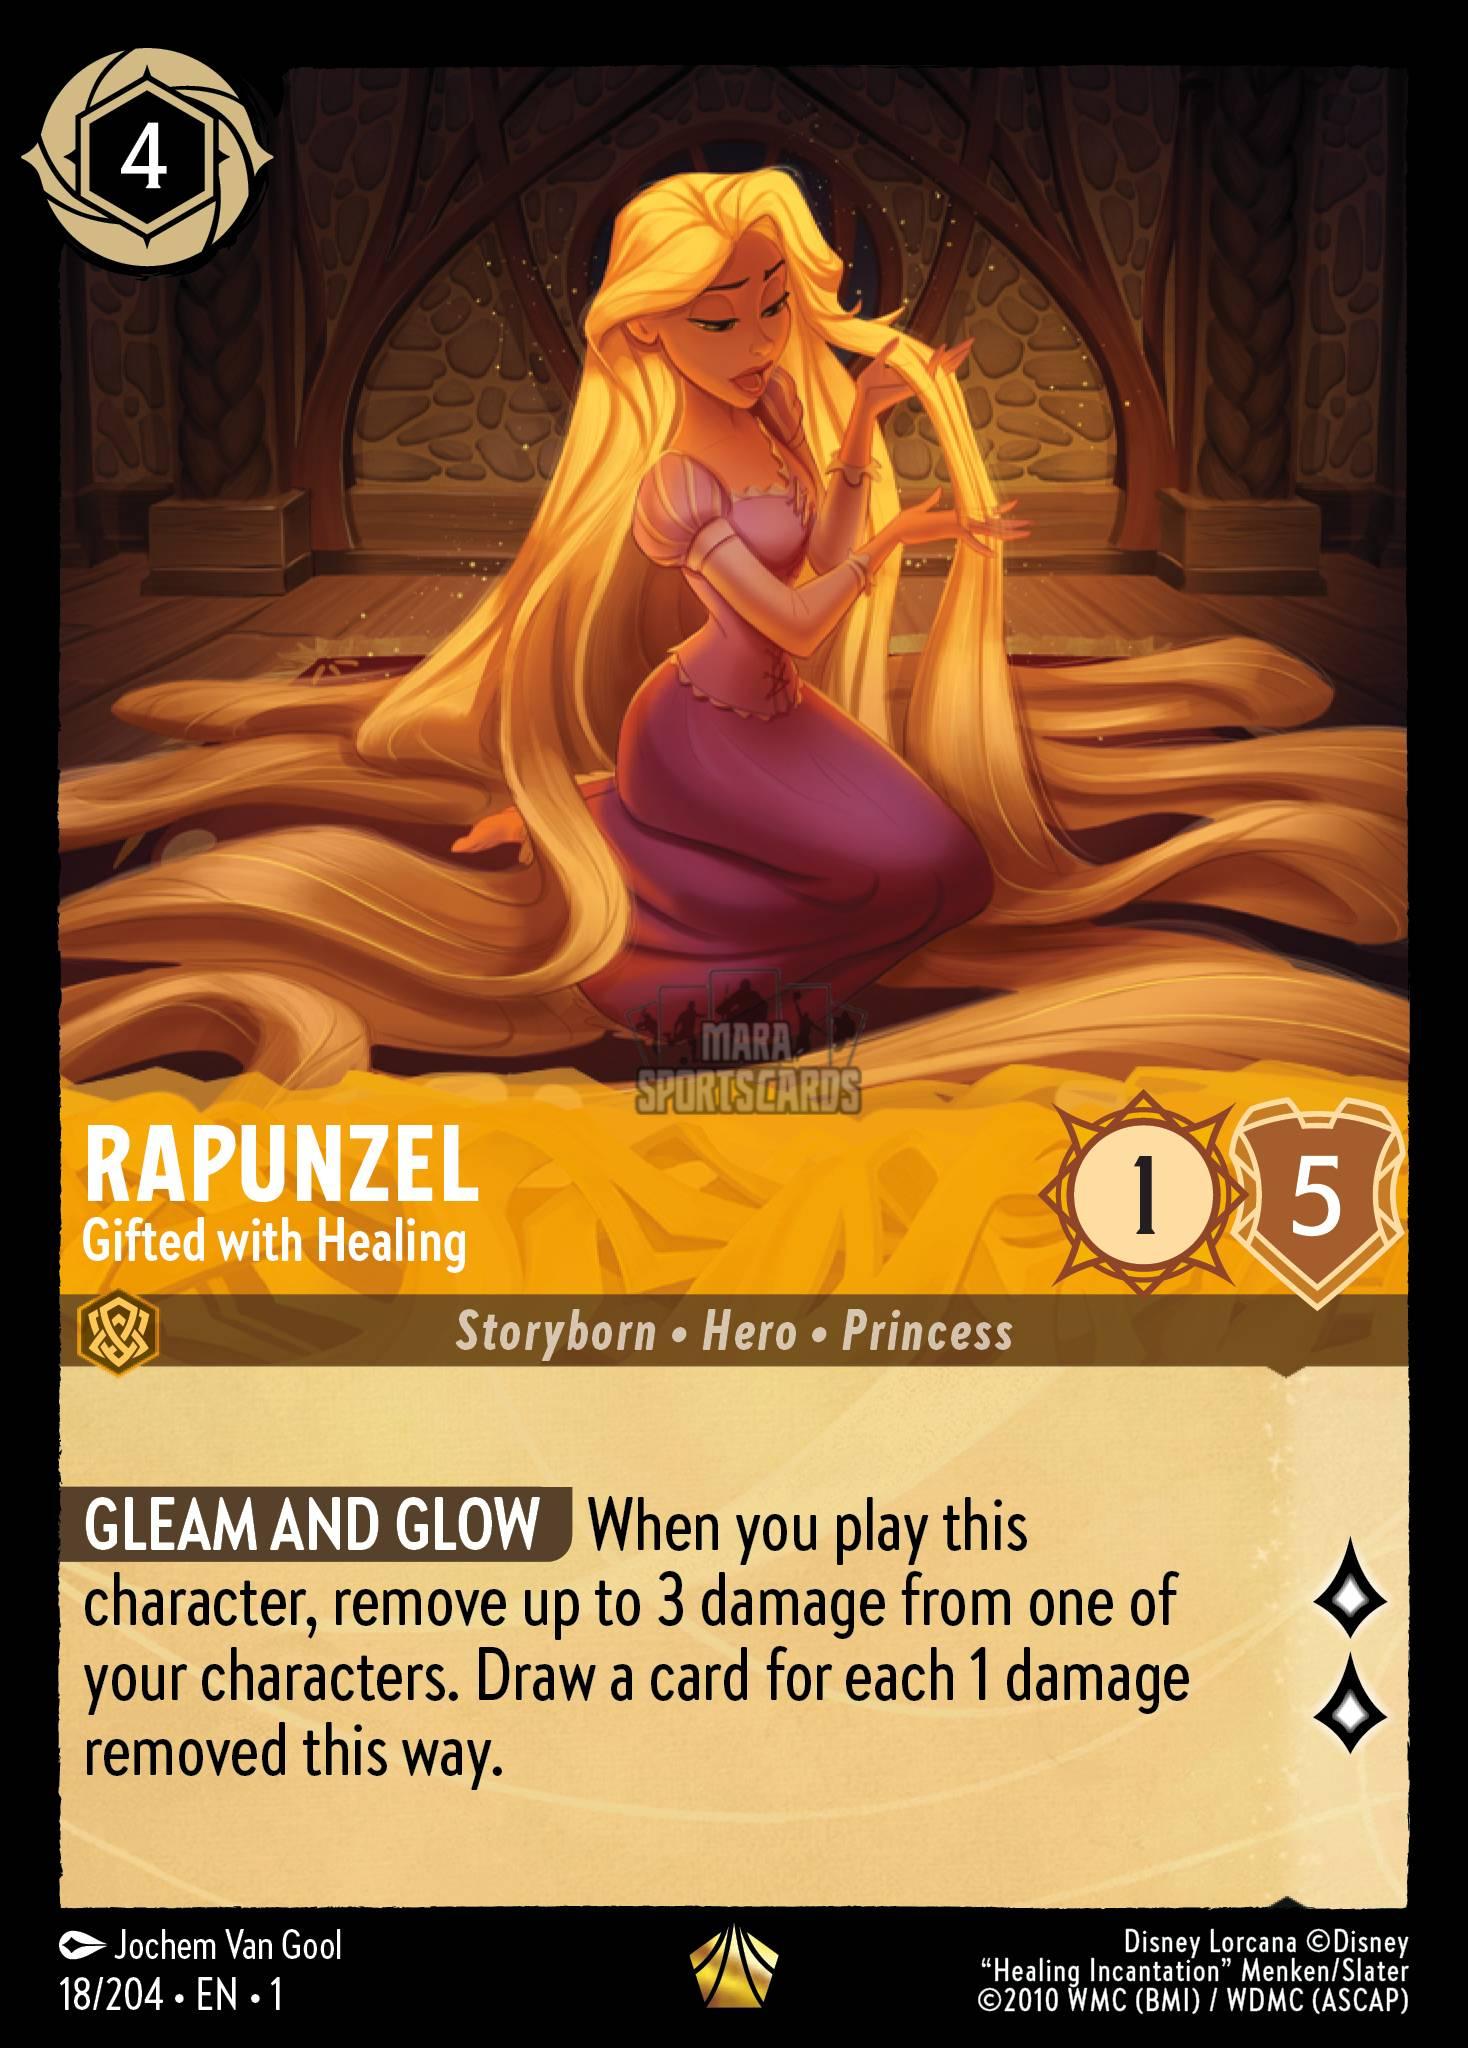 RAPUNZEL - Gifted with Healing